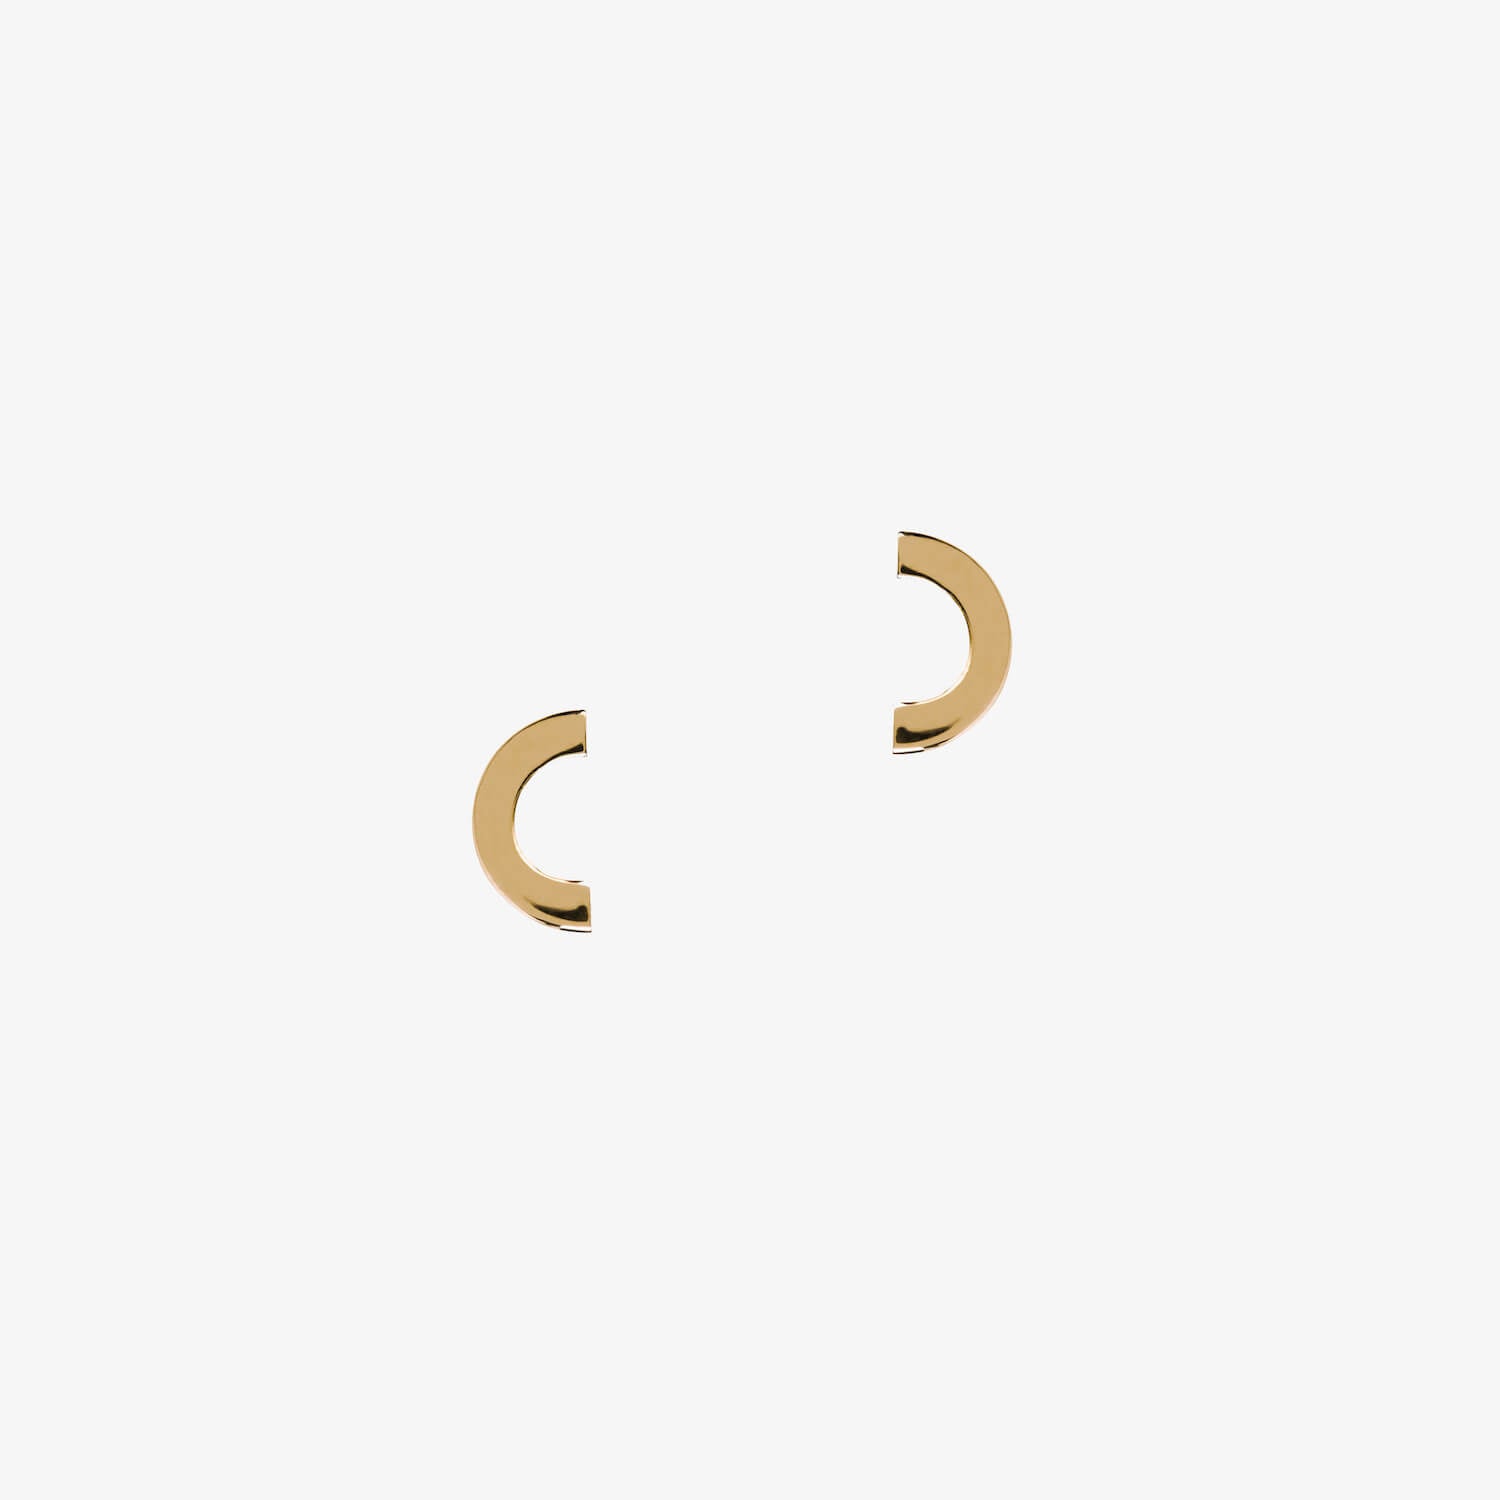 matthew calvin gold crescent shaped earrings on a white background